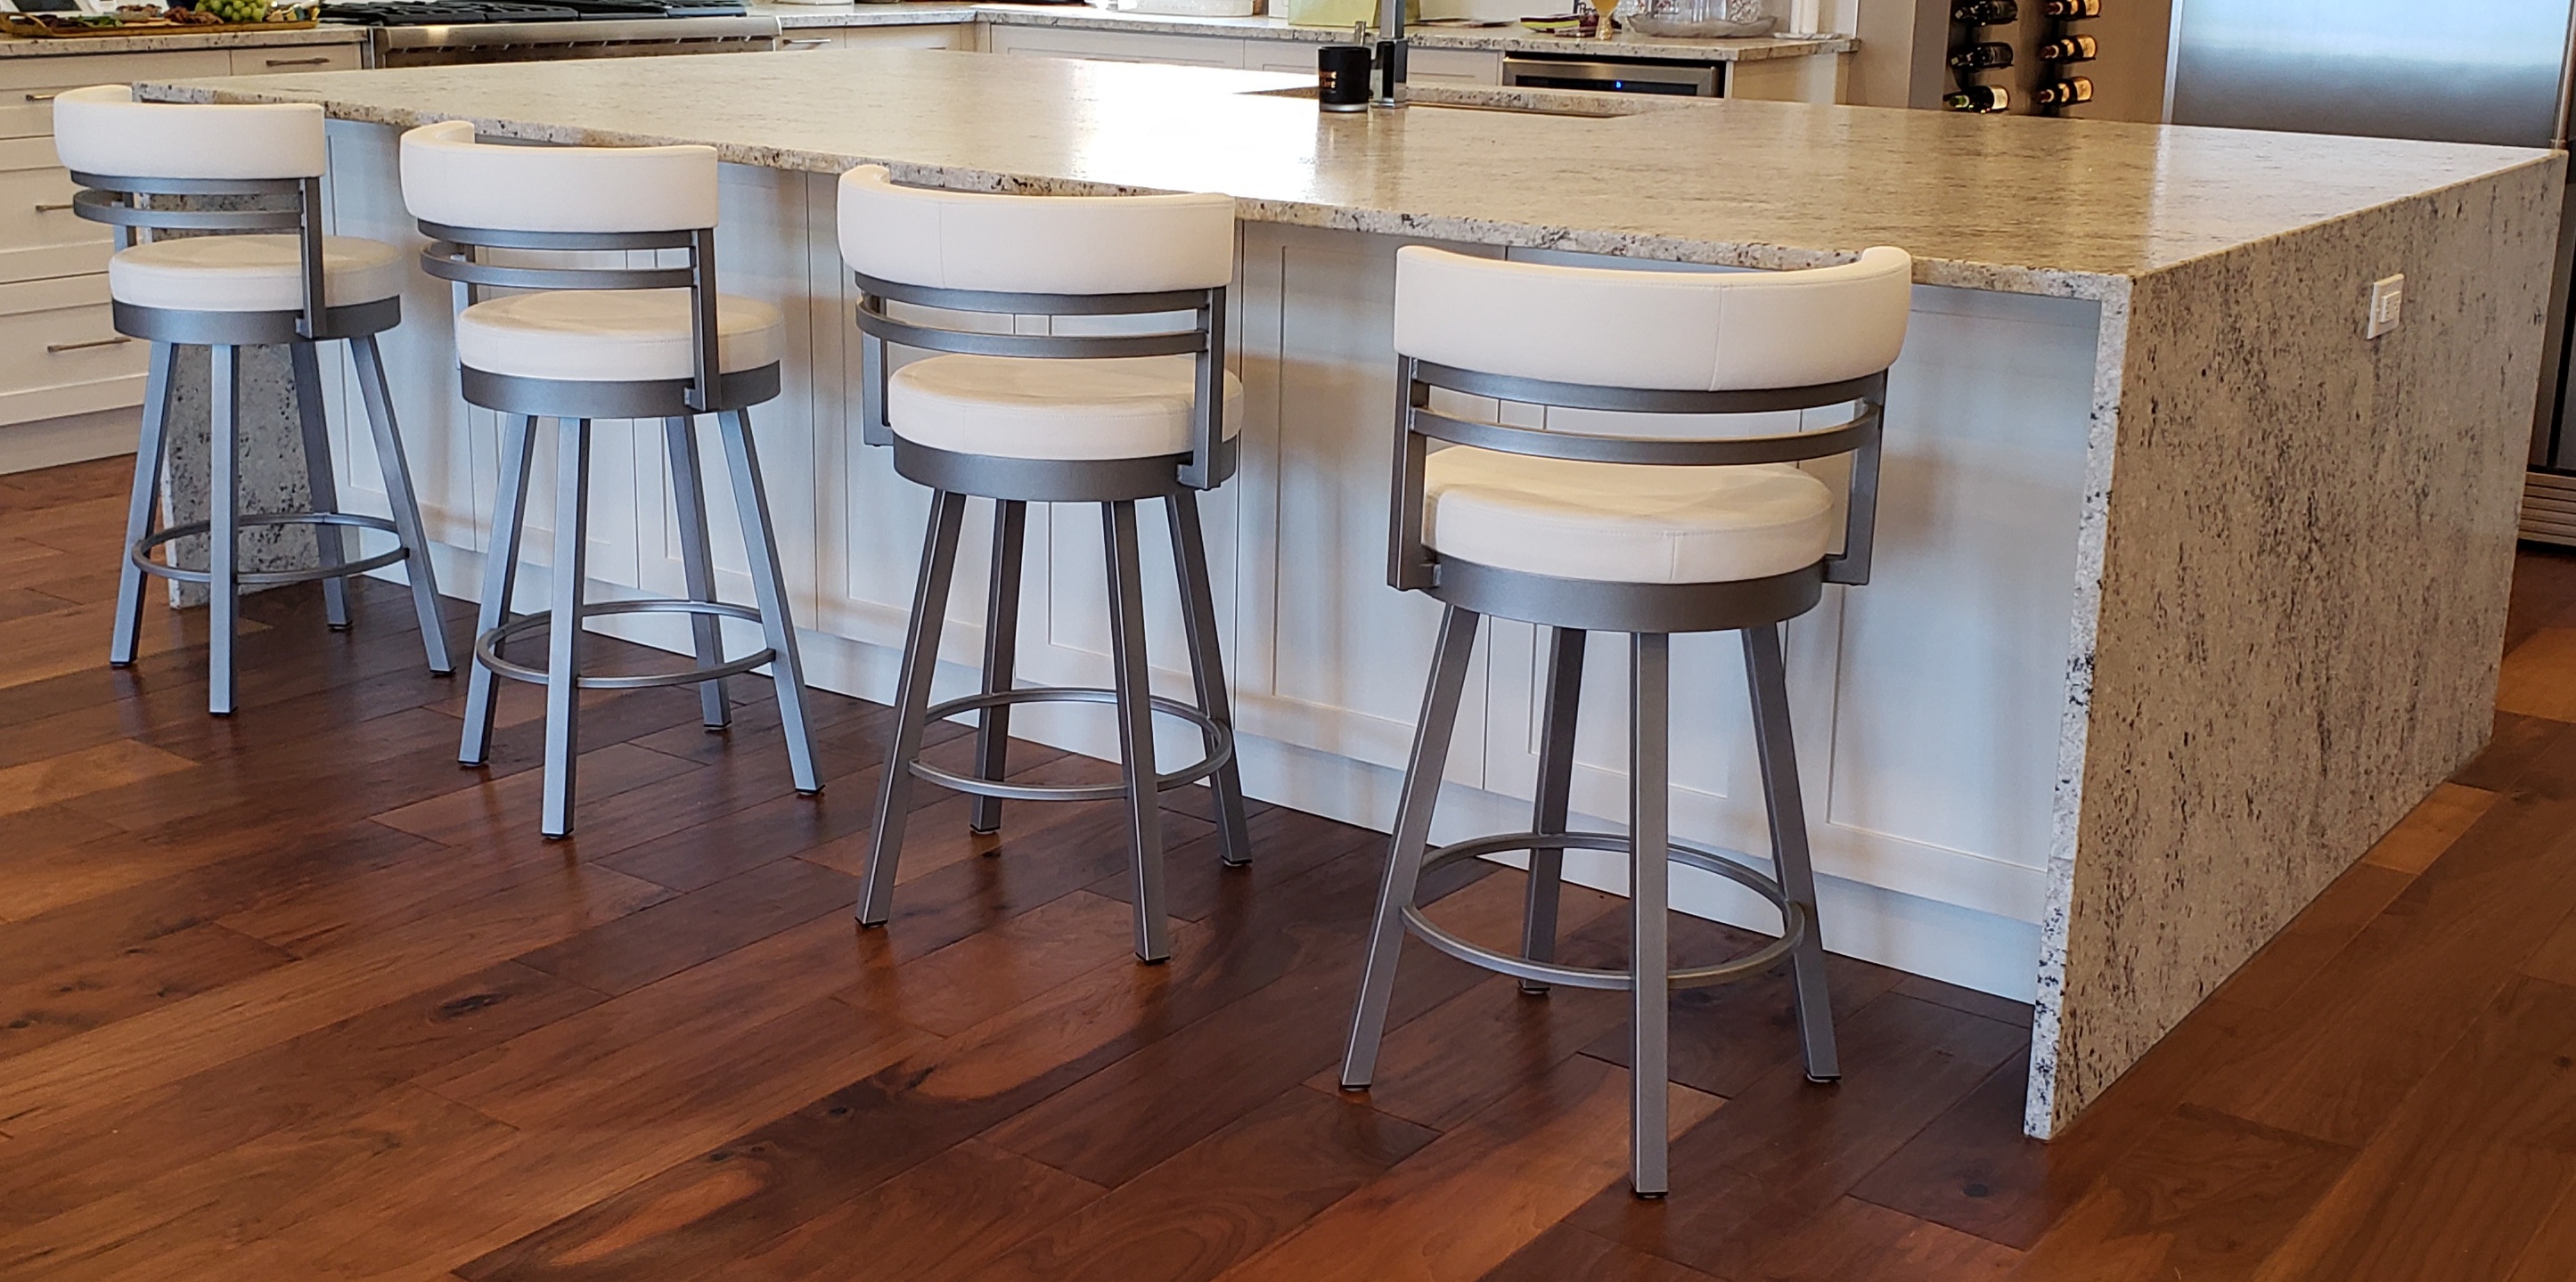 4 kitchen island bar stools for sale